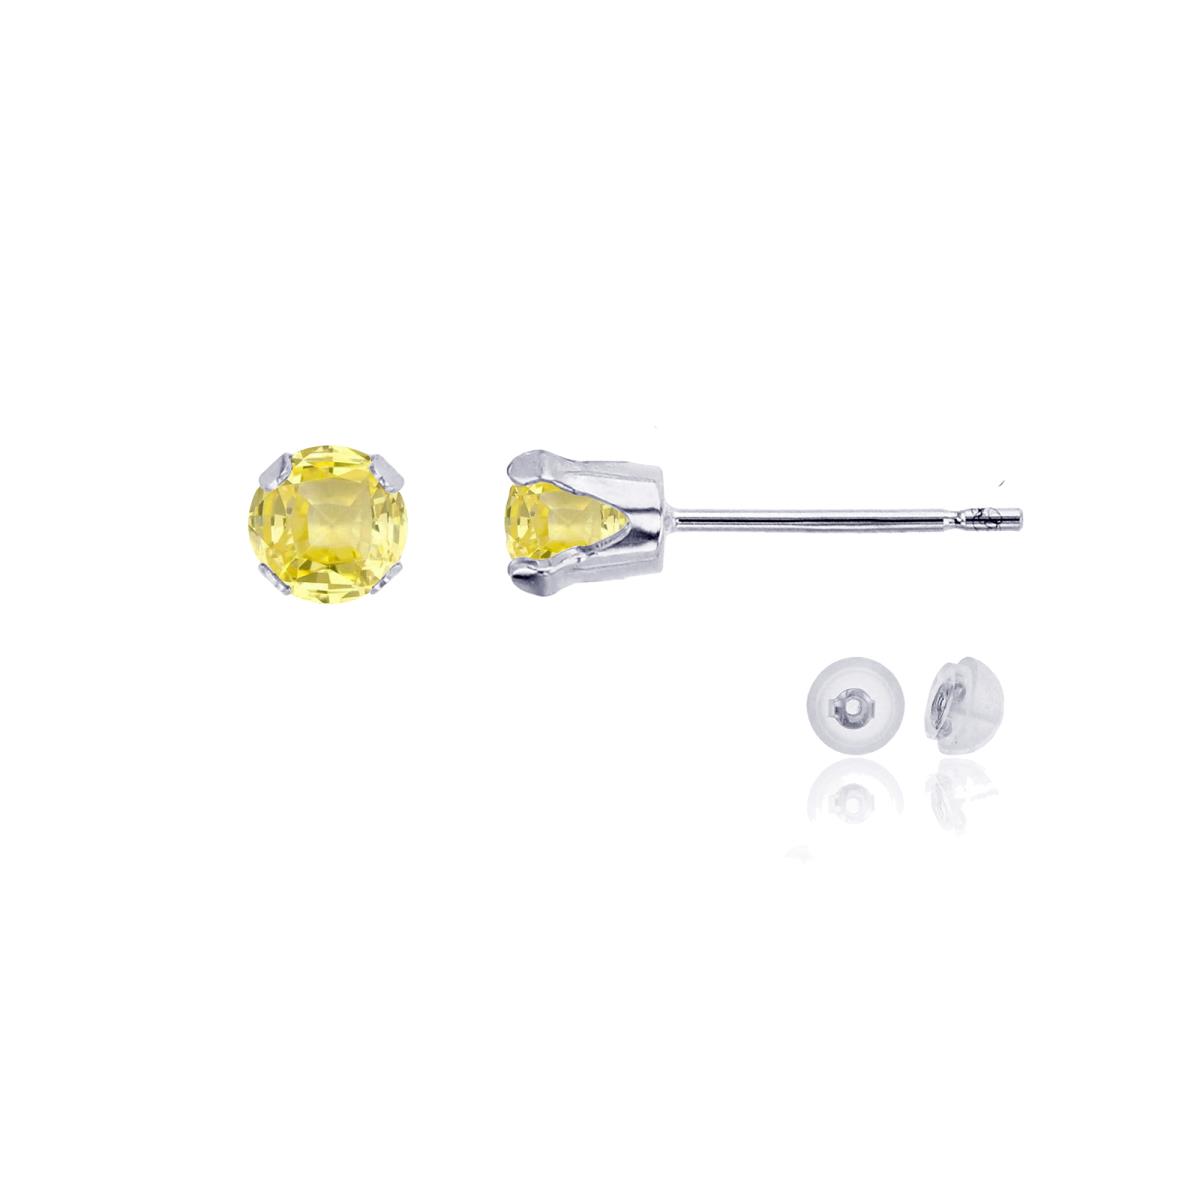 10K White Gold 4mm Round Cr Yellow Sapphire Stud Earring with Silicone Back